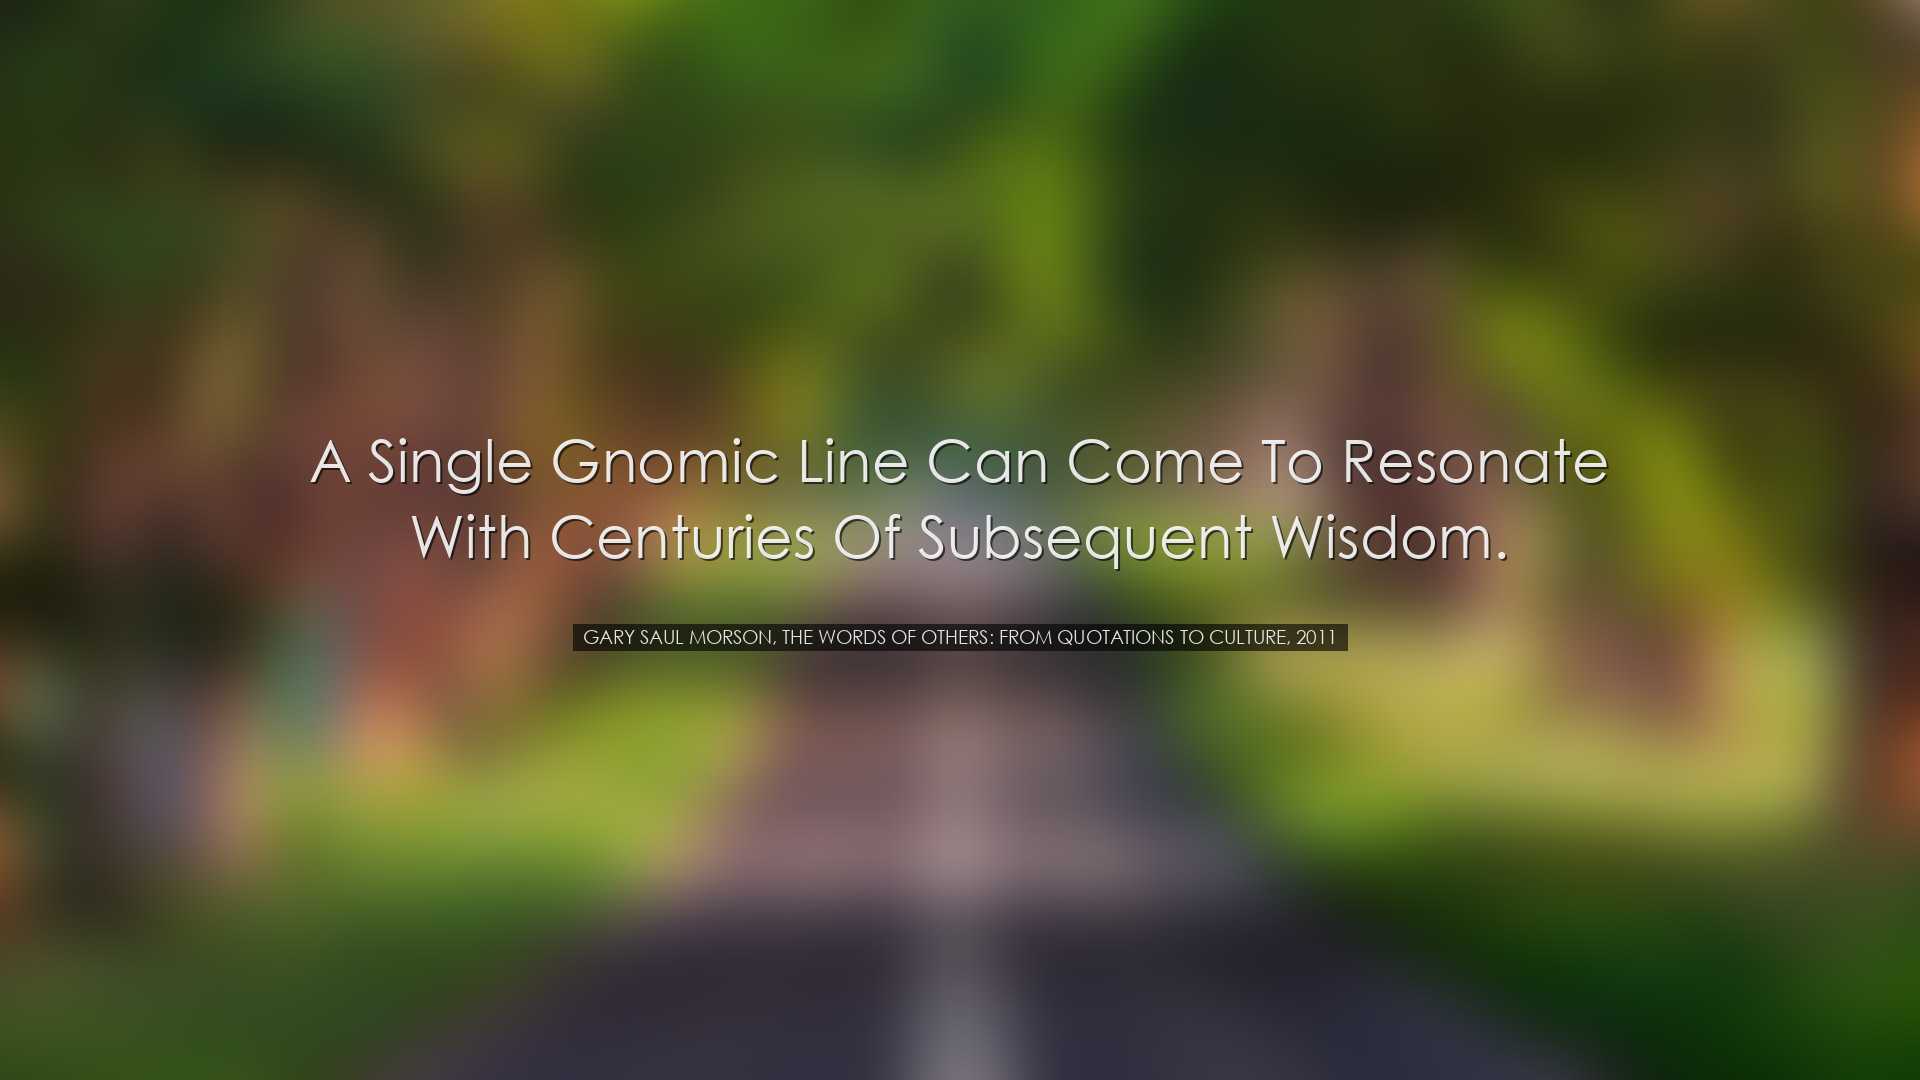 A single gnomic line can come to resonate with centuries of subseq